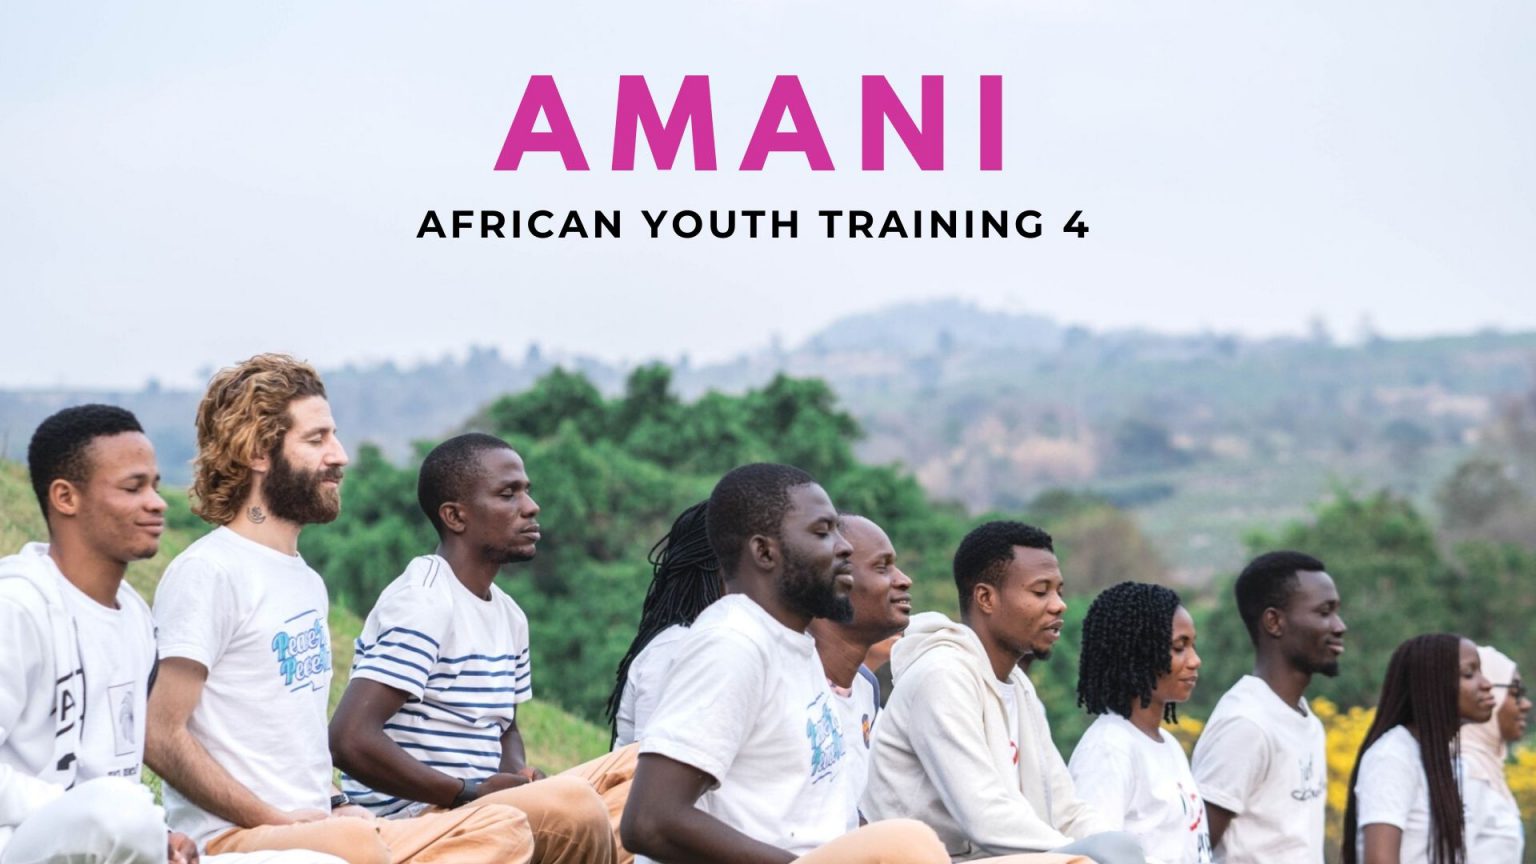 image from AMANI African Youth Training 4